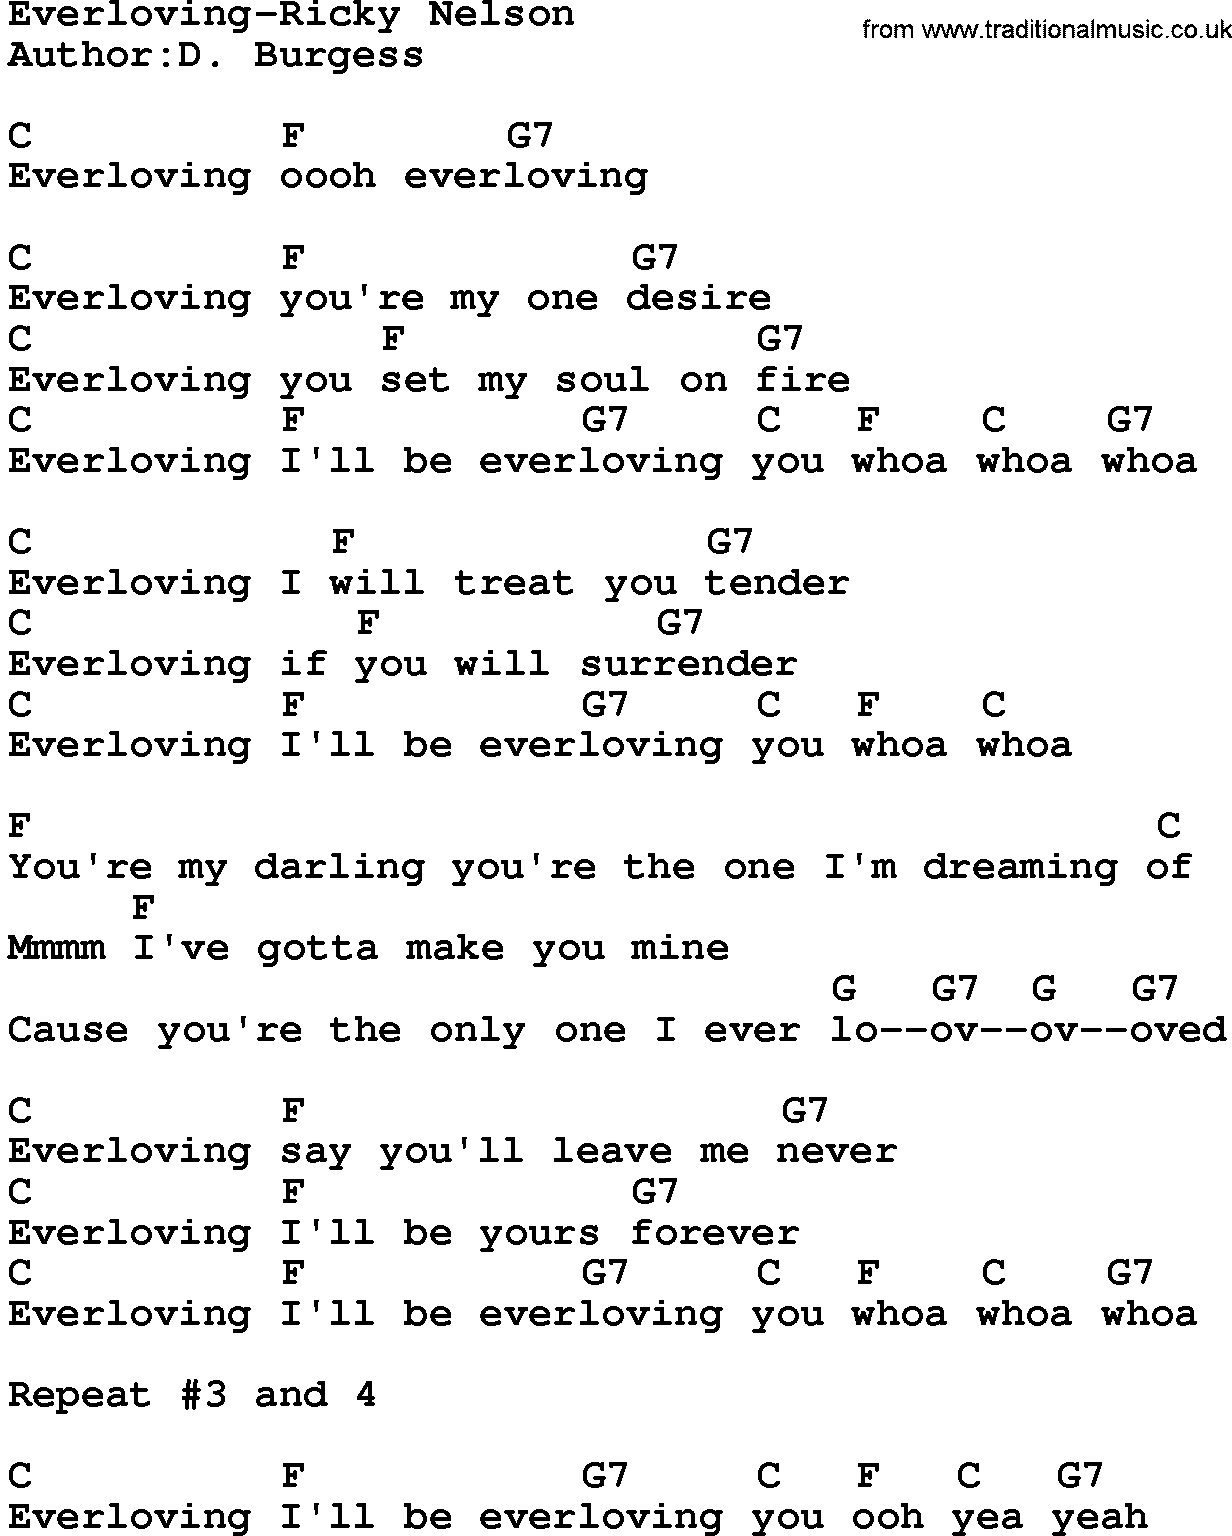 Country music song: Everloving-Ricky Nelson lyrics and chords